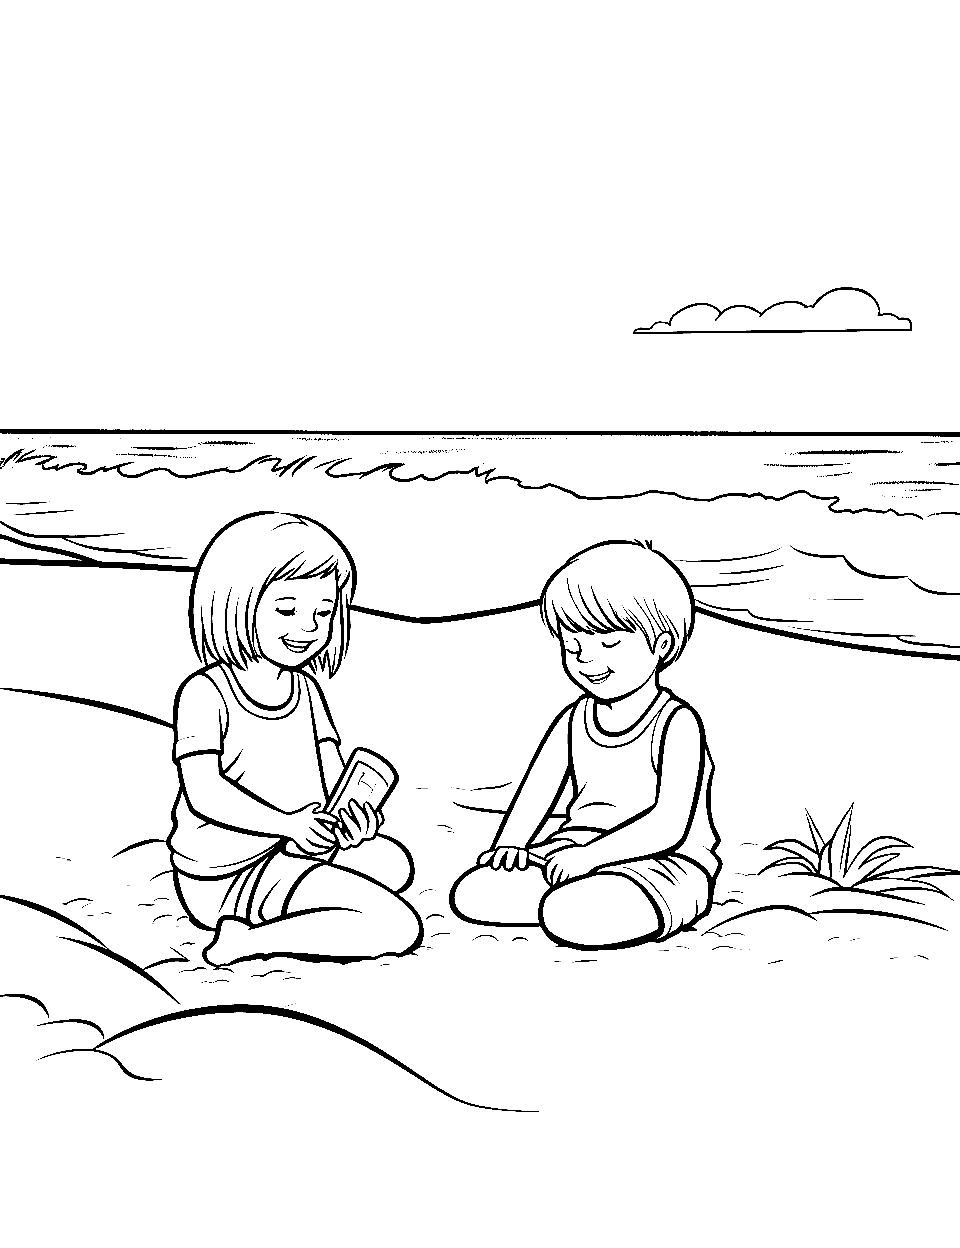 Fun Day at Beach Coloring Page - Two kids having fun on the beach together.